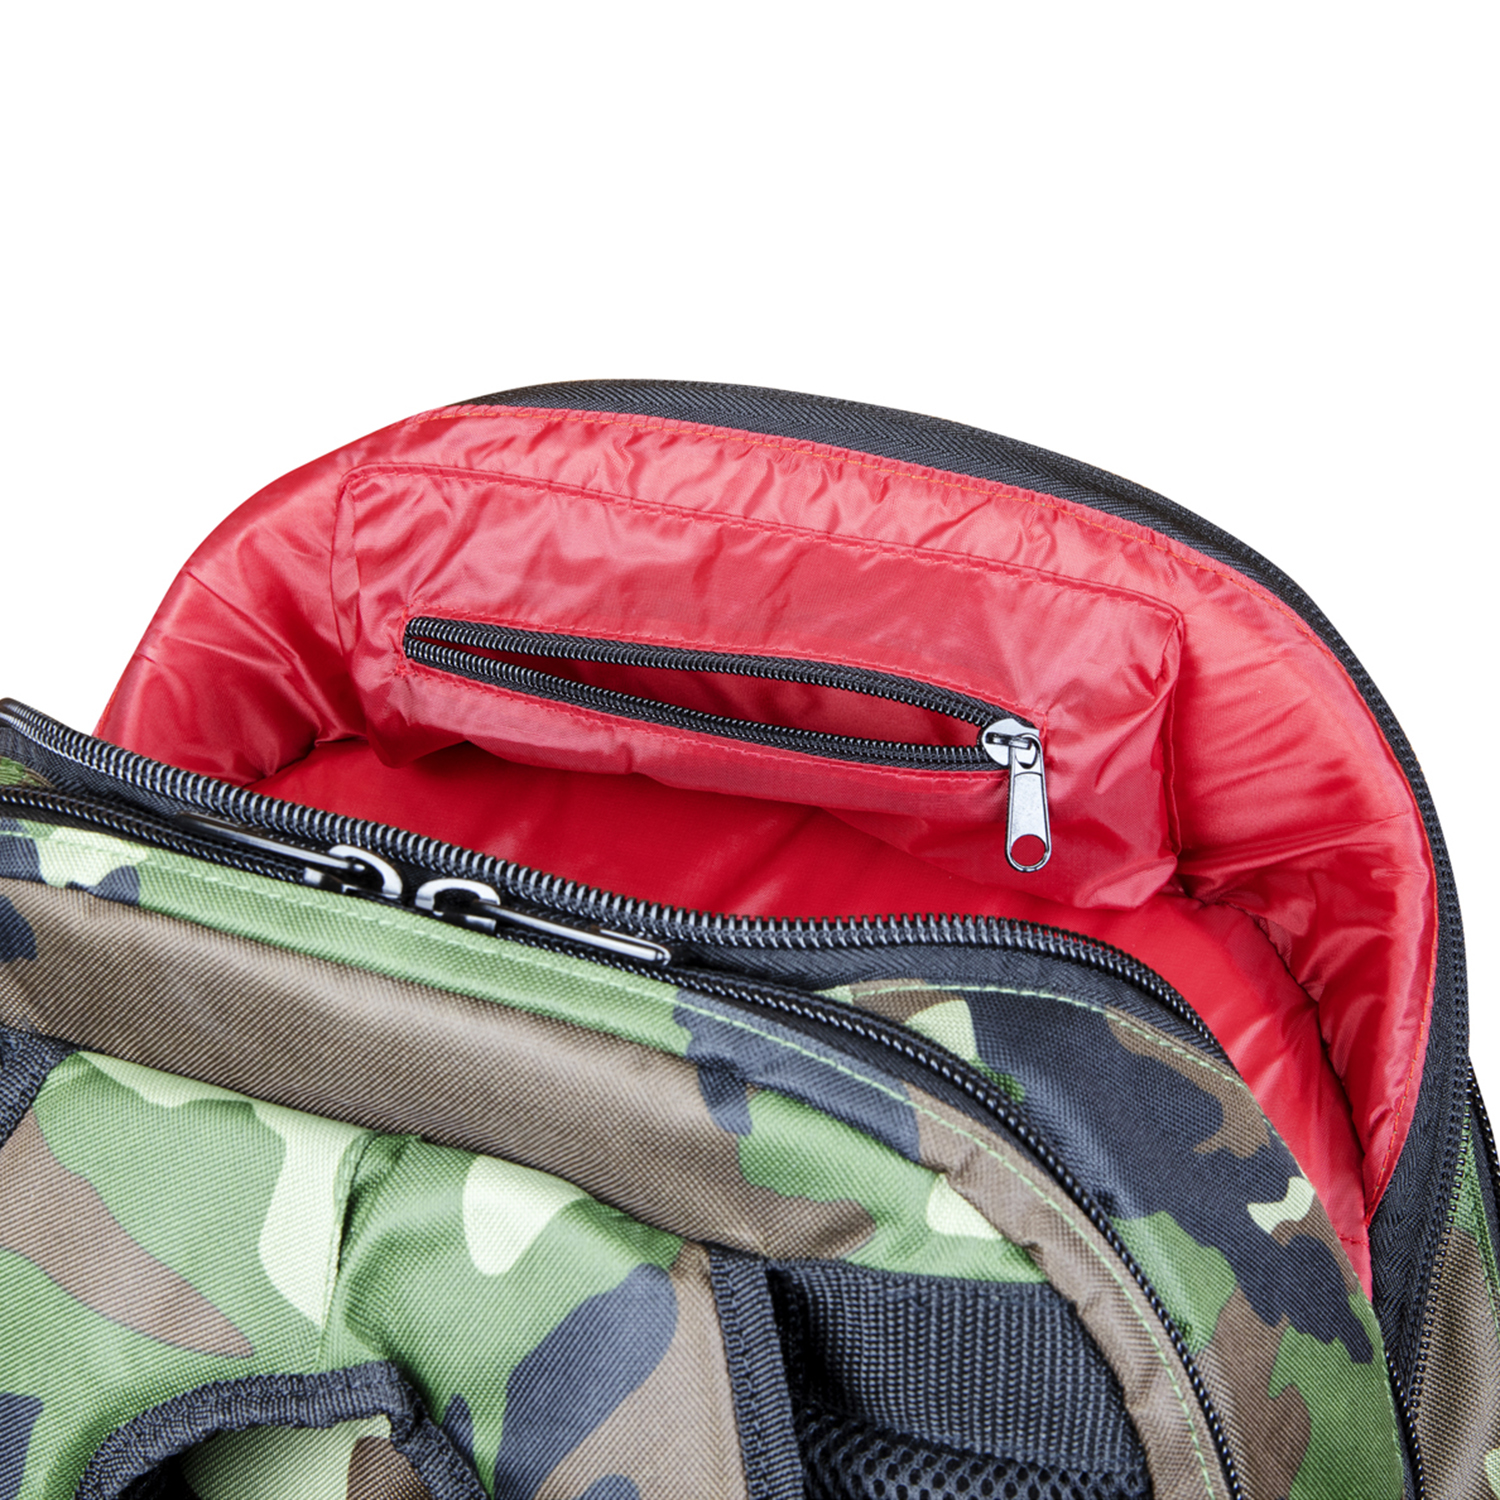 Green Camouflage Digital Gear Backpack - Odyssey Cases